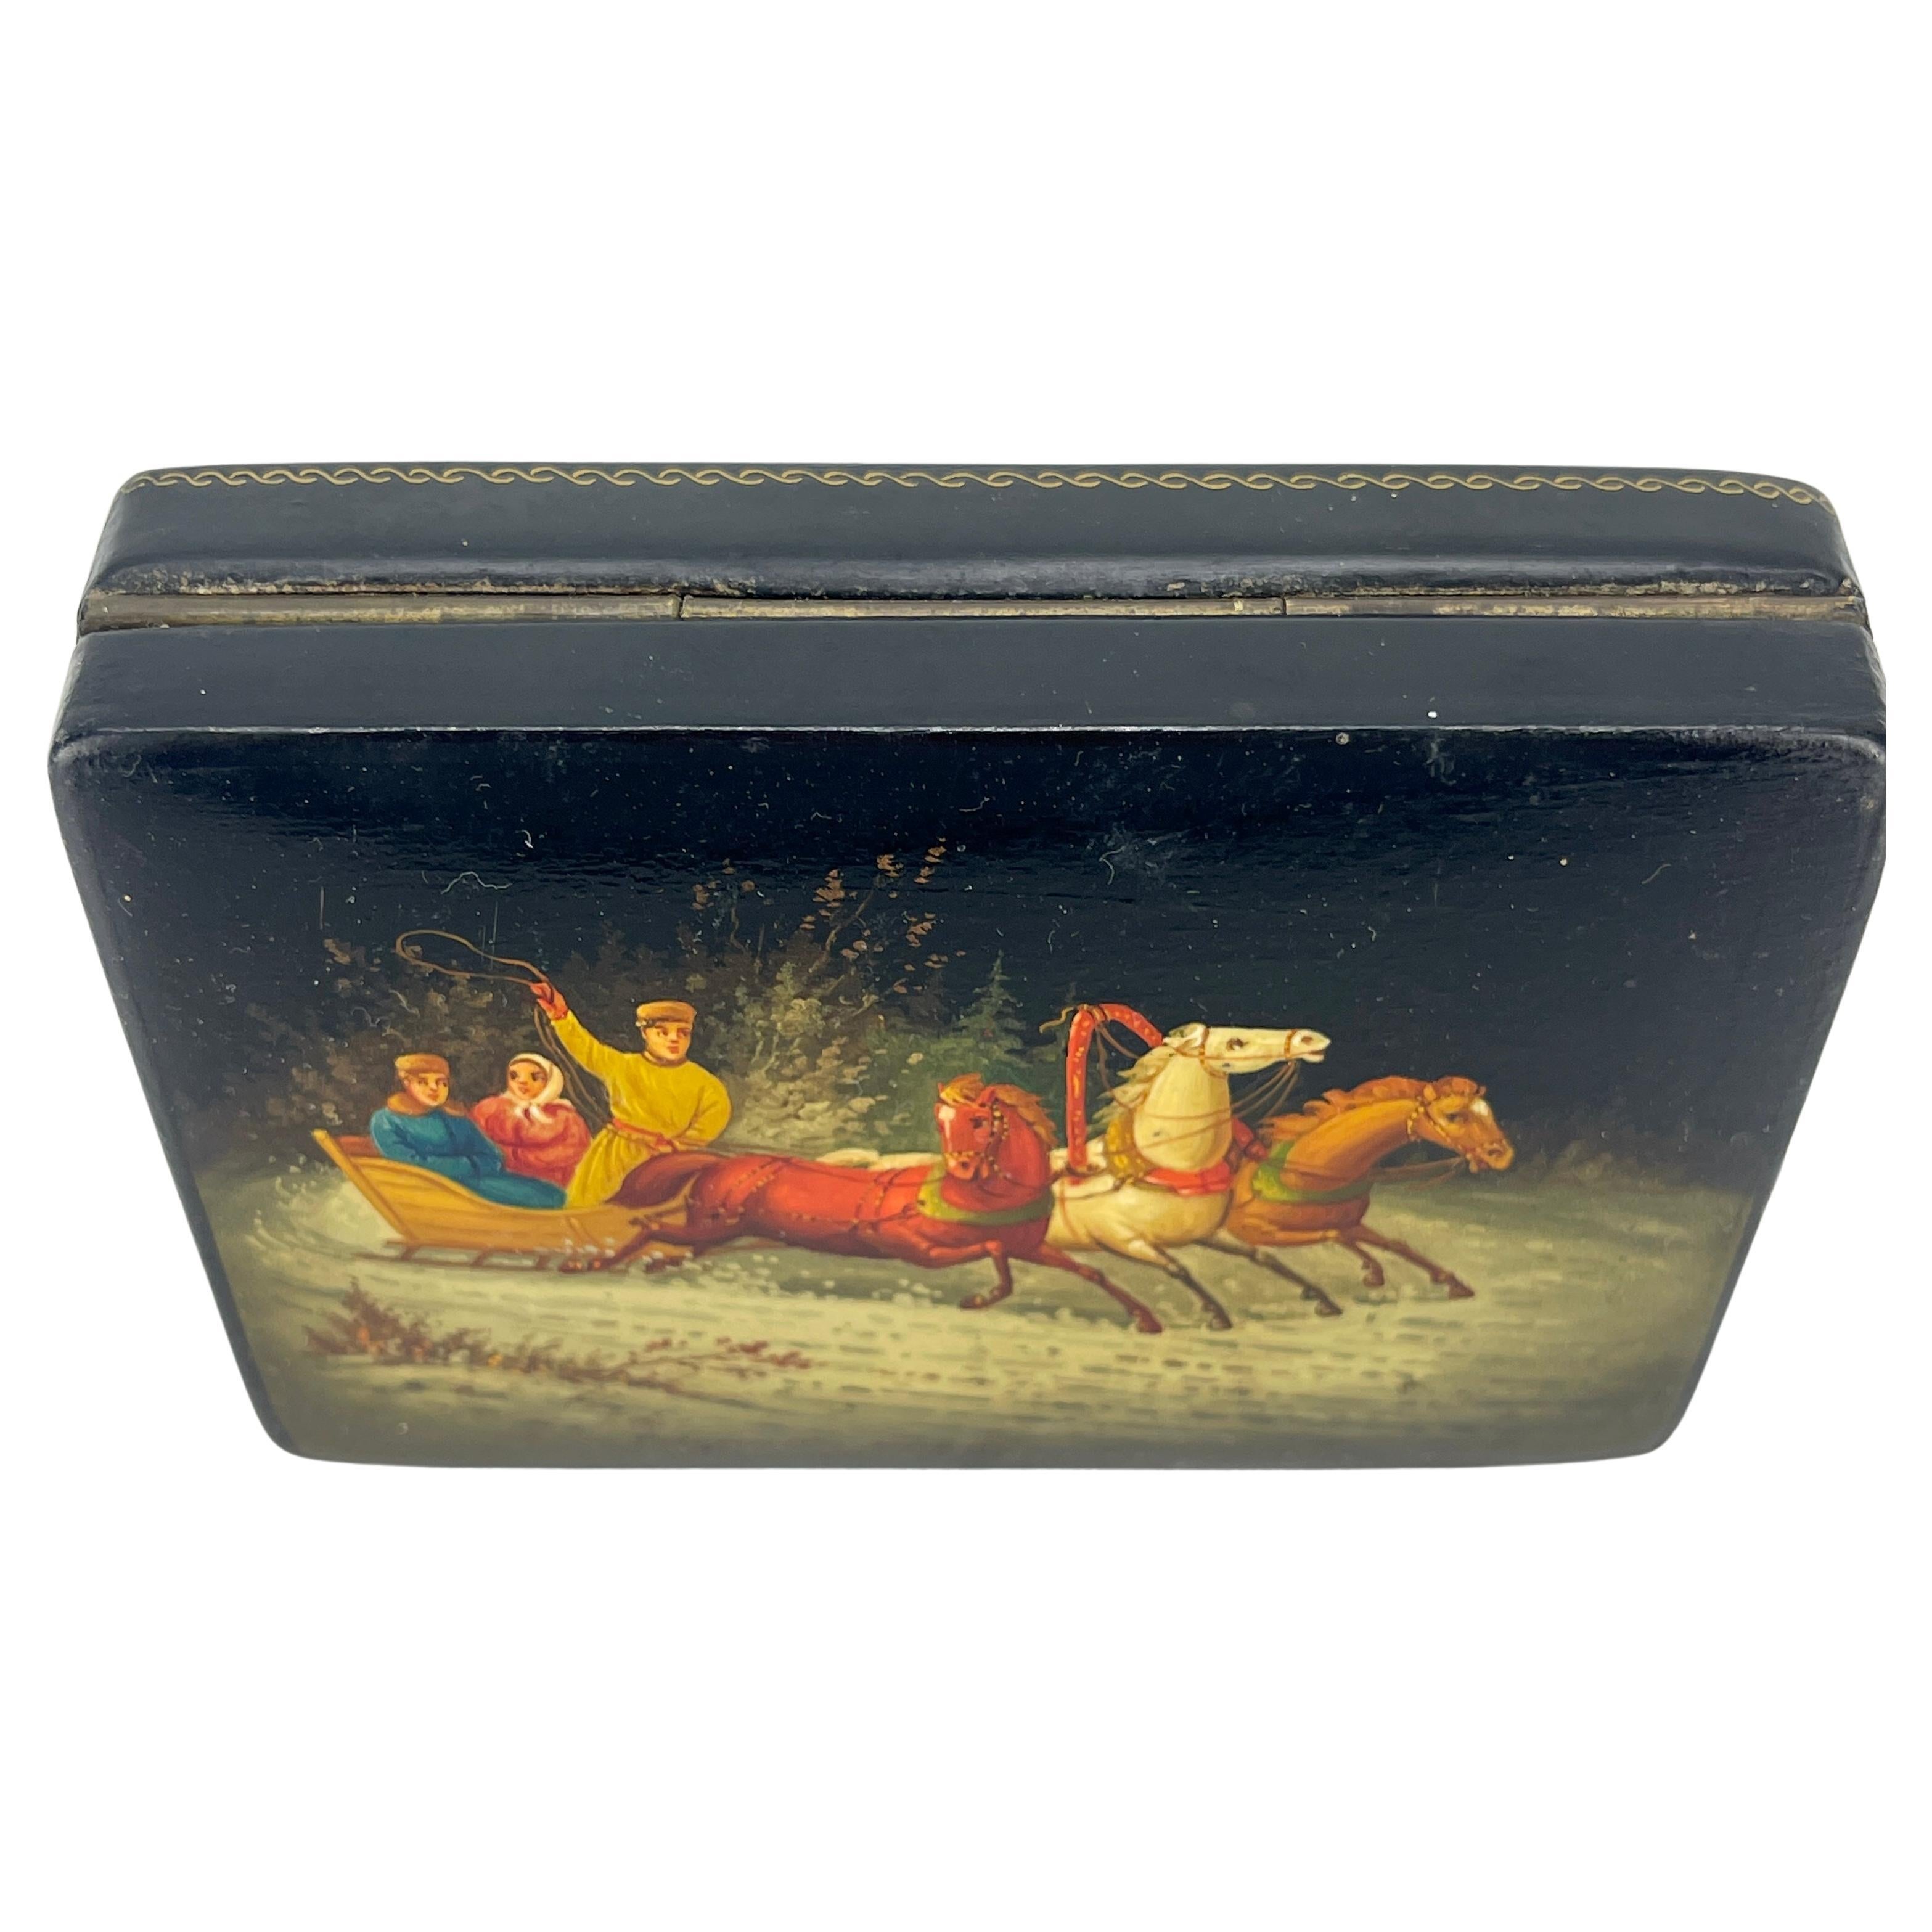 Rectangular Black and Red Lacquered Snuff Box, Signed and Dated 1971.
This tobacco snuff box is richly and colorfully decorated with a winter scene showing 3 people riding a sleigh in the snow being pulled by 3 wild horses.
This Soviet-era box has a